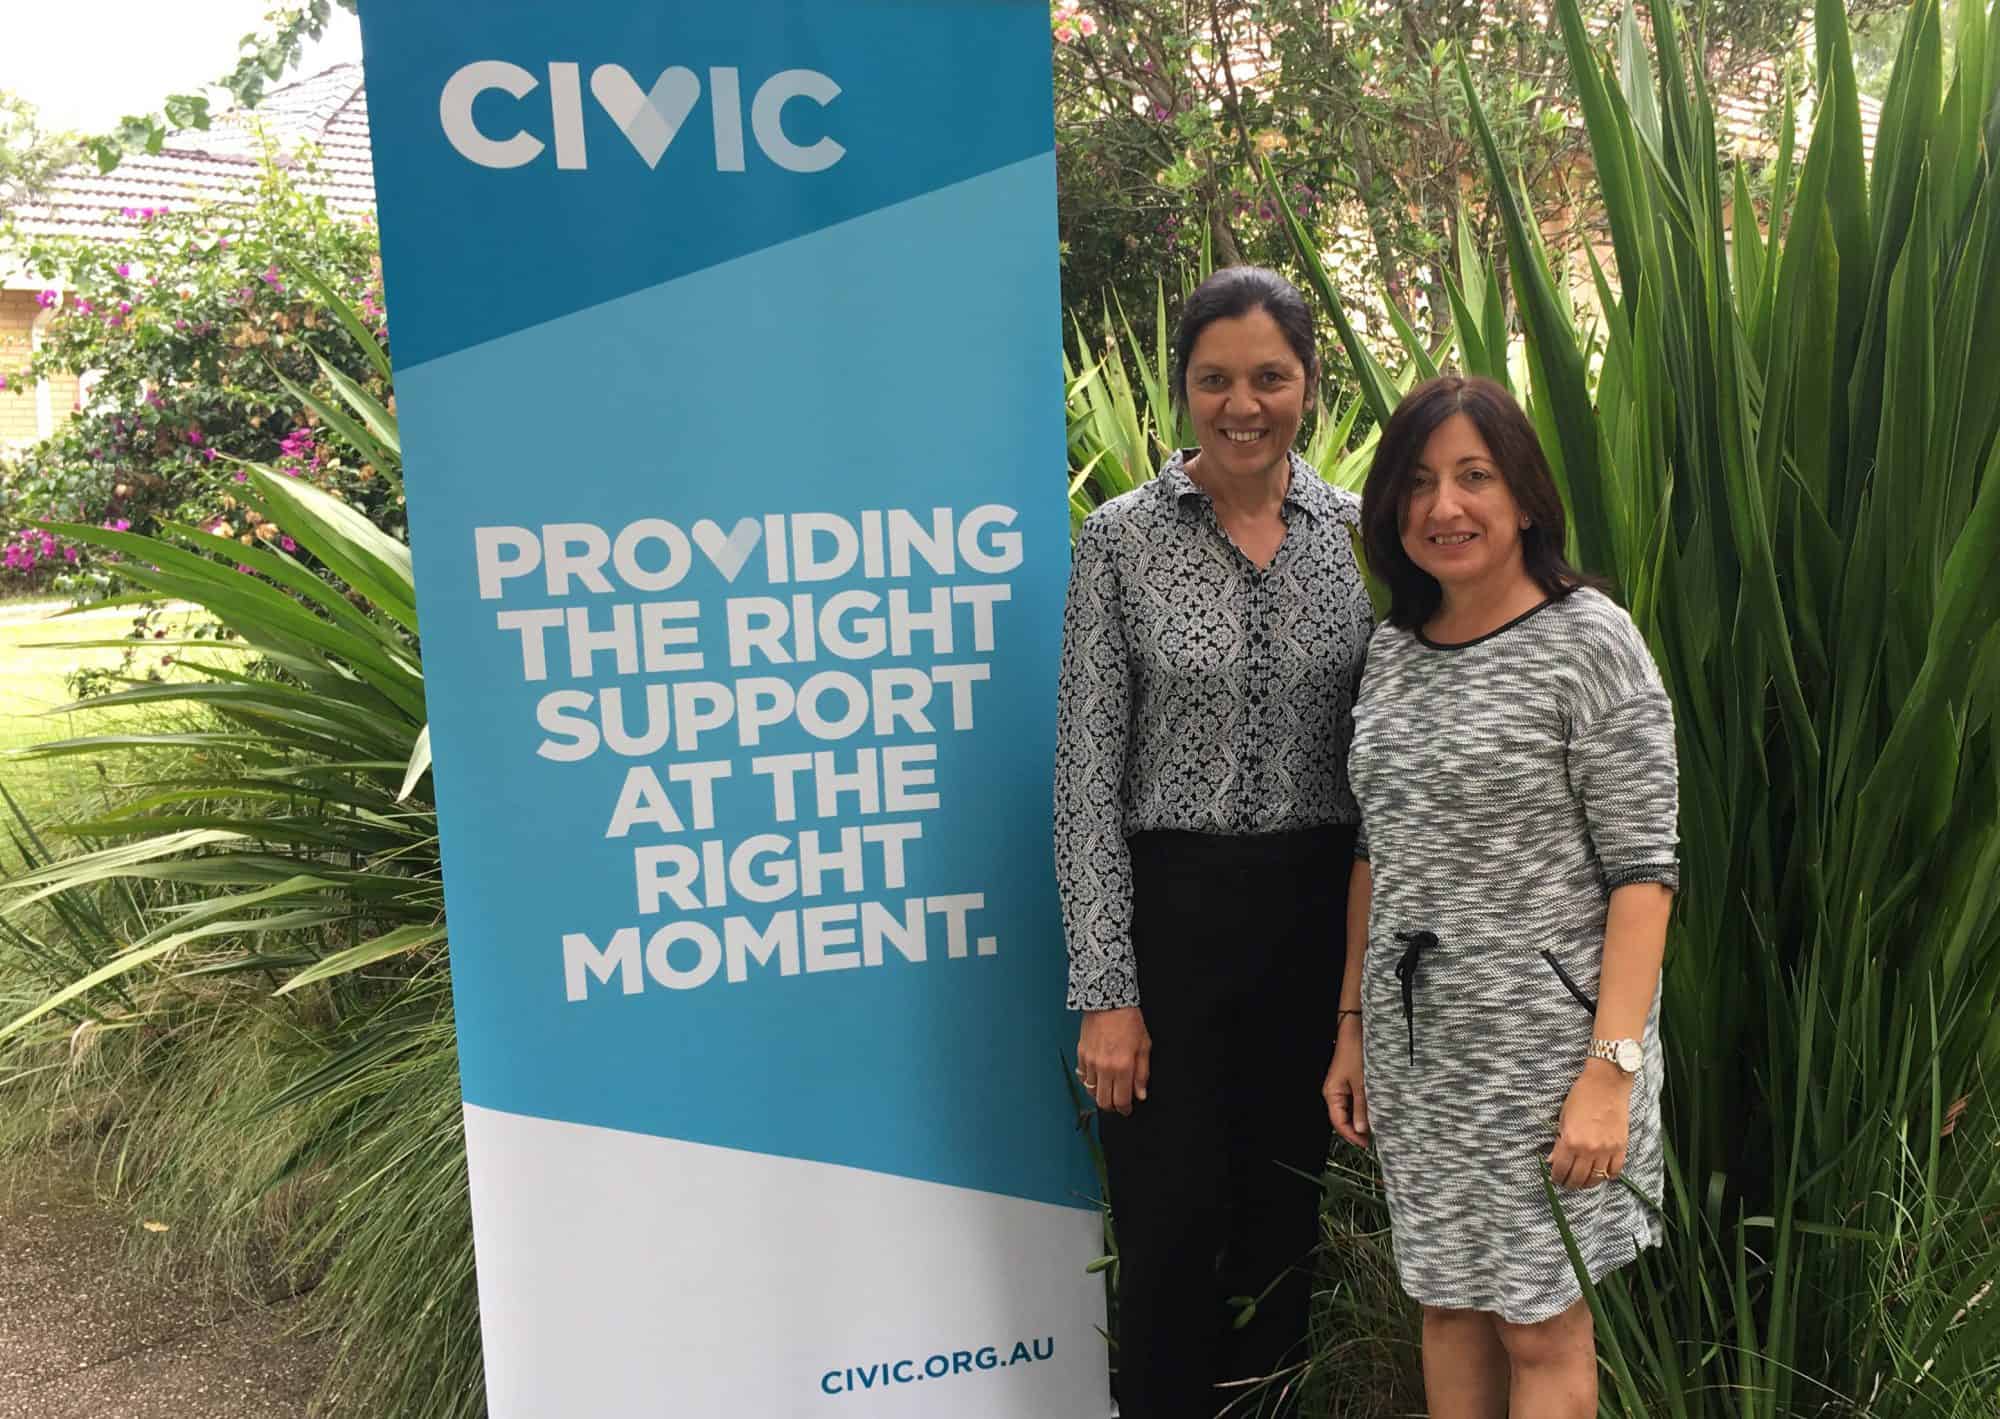 Chairperson Rapti Nethery with  Civic CEO Annie Doyle